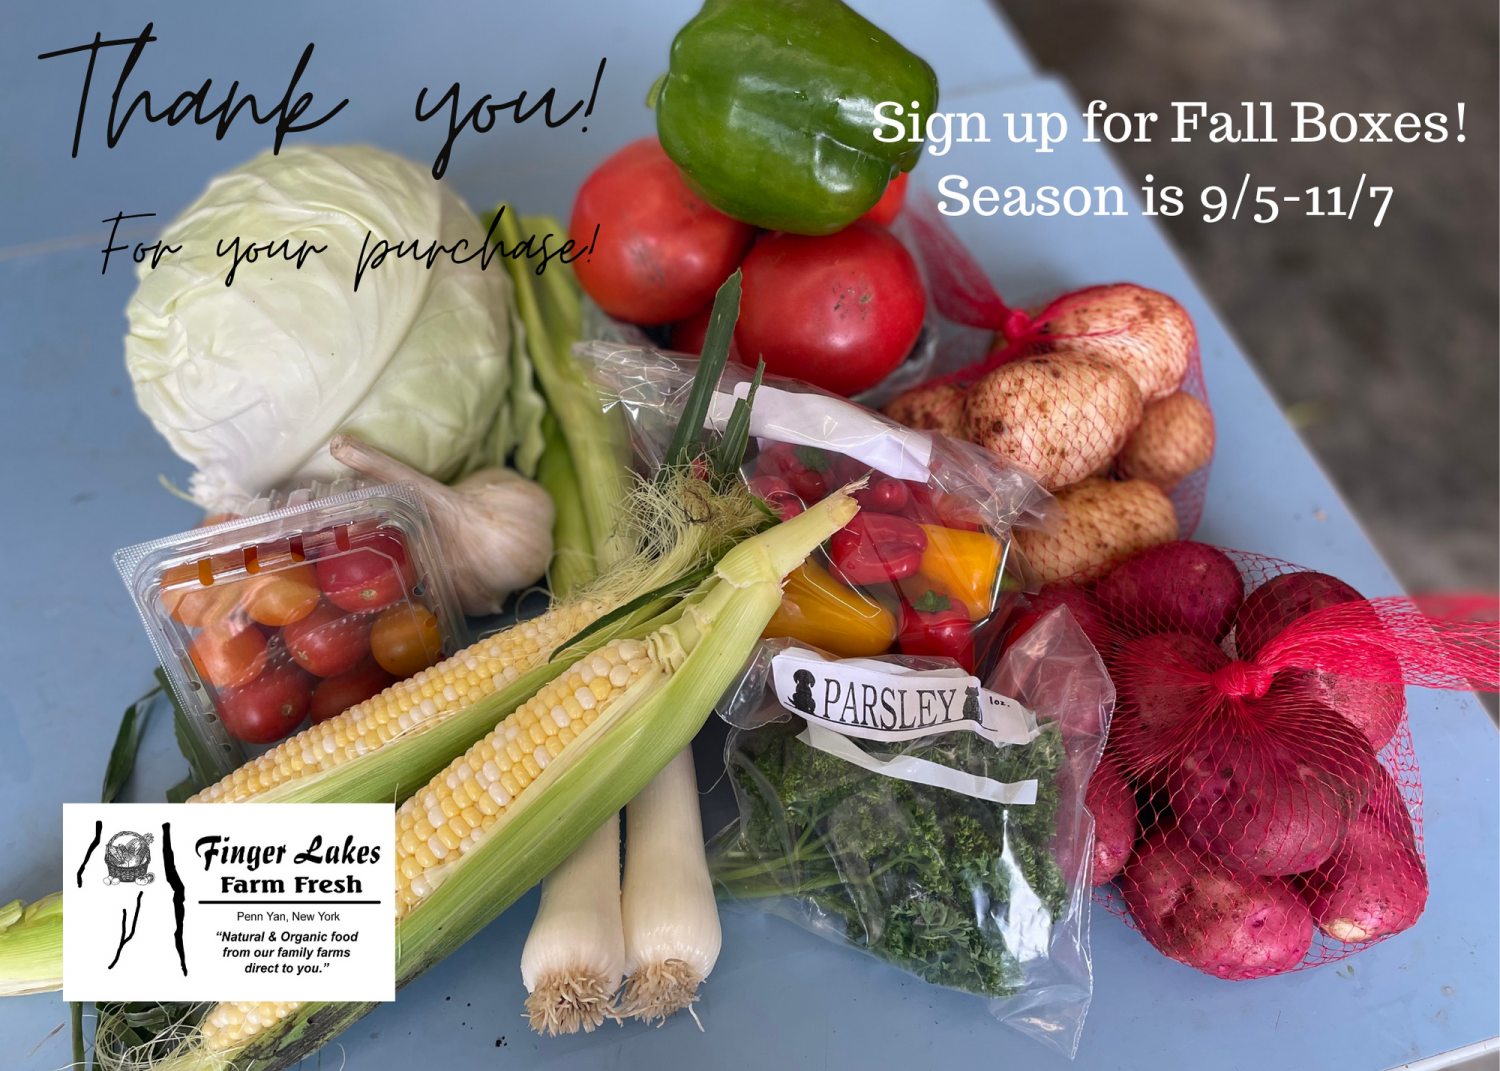 Fall is in the air!  Are you signed up to keep getting Veggies!?